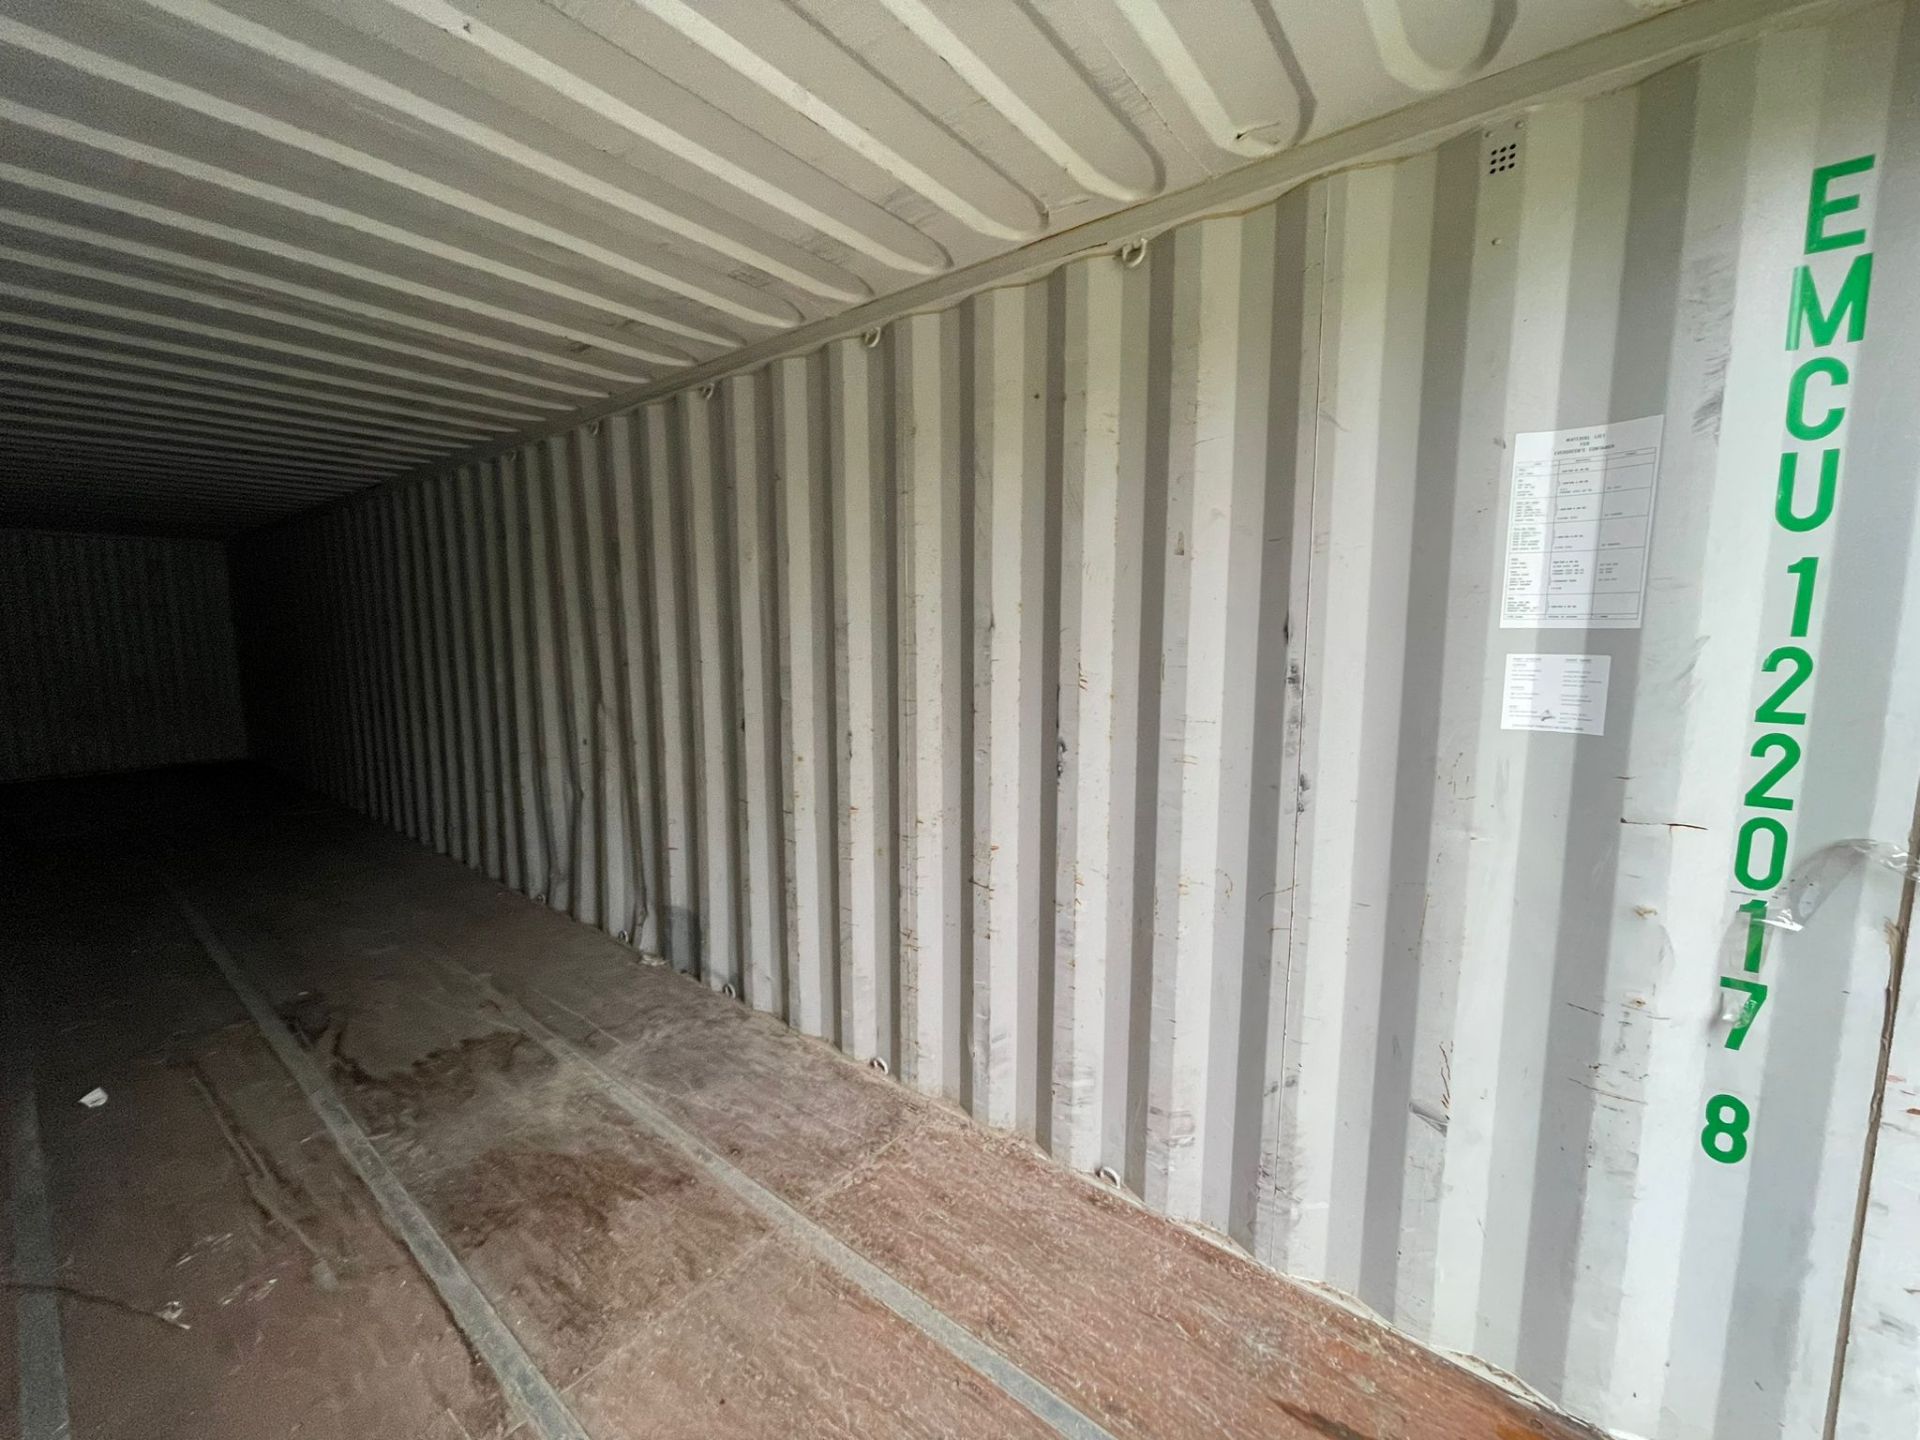 Shipping Container - ref EMCU1220178 - NO RESERVE (40’ GP - Standard) - Image 2 of 4